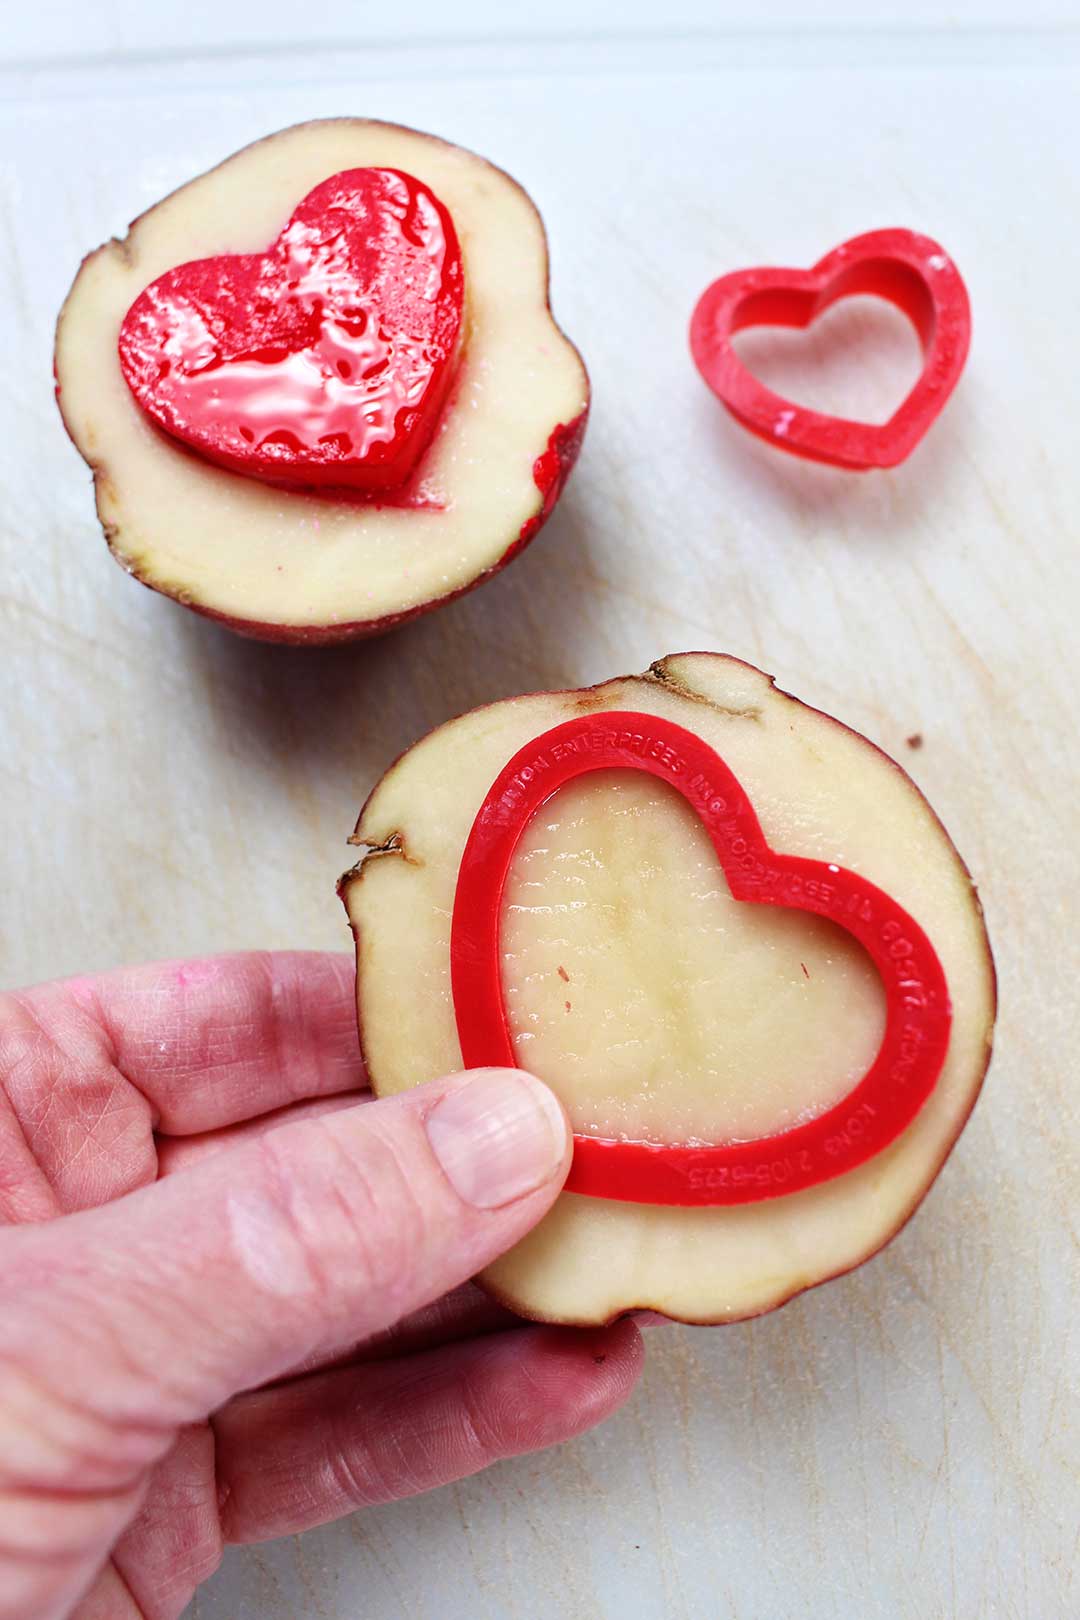 Hand pressing a red plastic heart cookie cutter in potato to make a stamp.